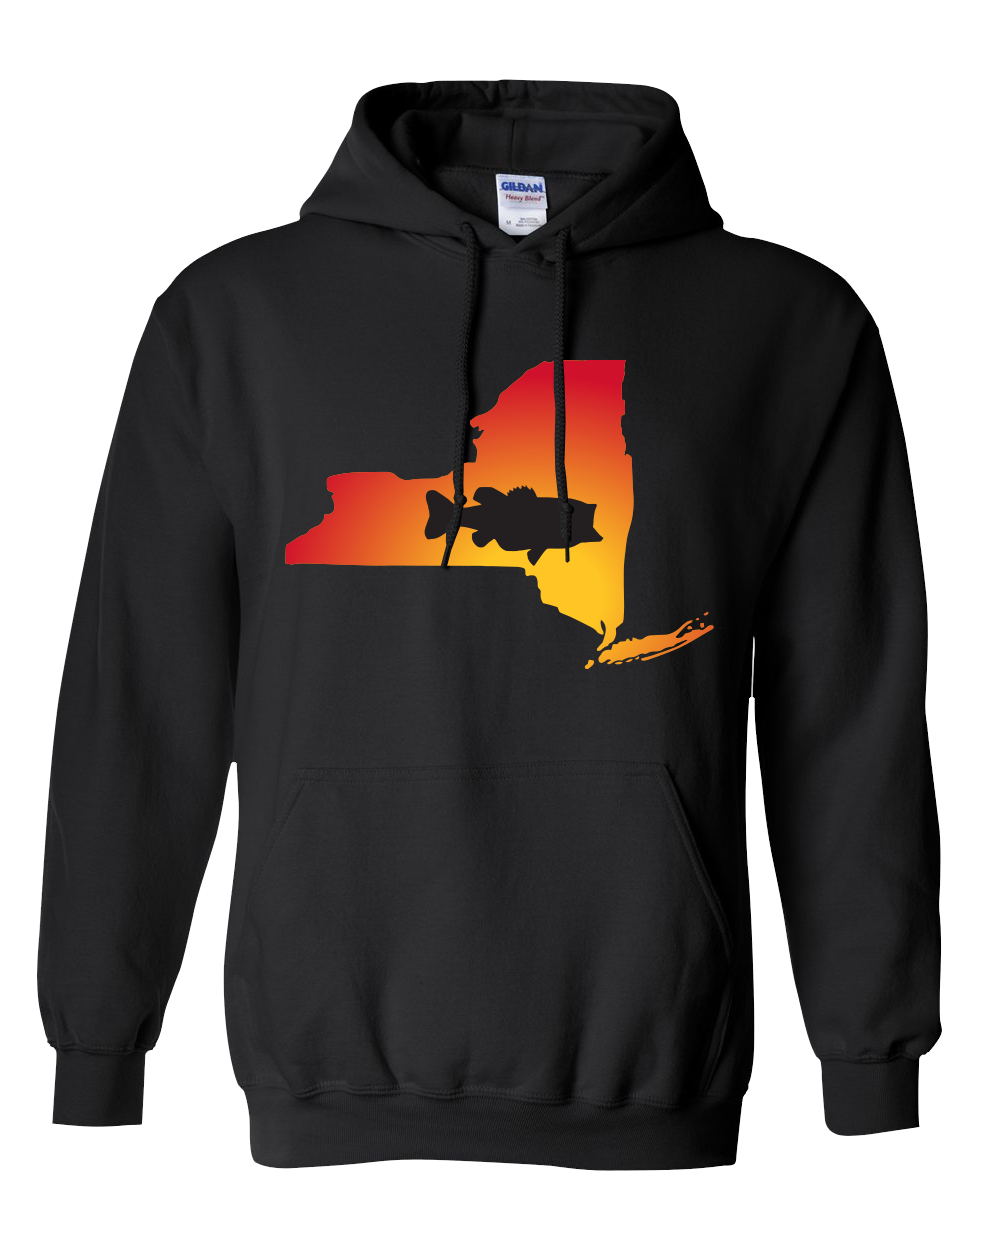 Pullover Hooded Sweatshirt New York Black Large Mouth Bass Vibrant Design High Quality Tight Knit Ring Spun Low Maintenance Cotton Printed With The Newest Available Color Transfer Technology